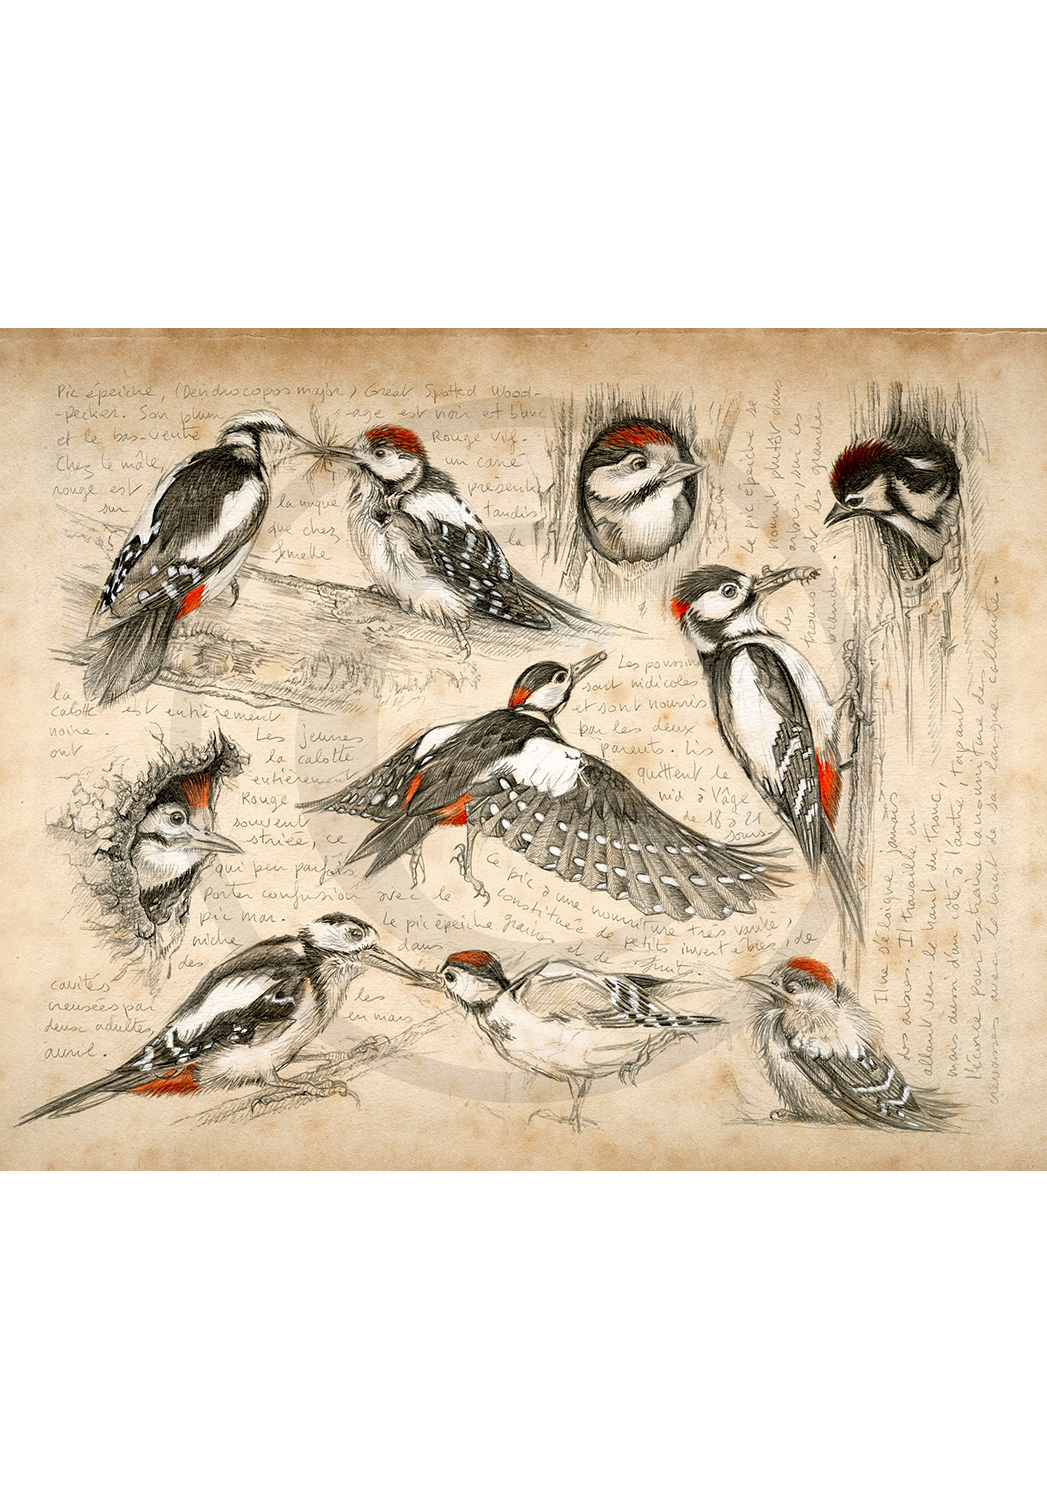 Marcello-art: Ornithology 327 - Great Spotted Woodpecker